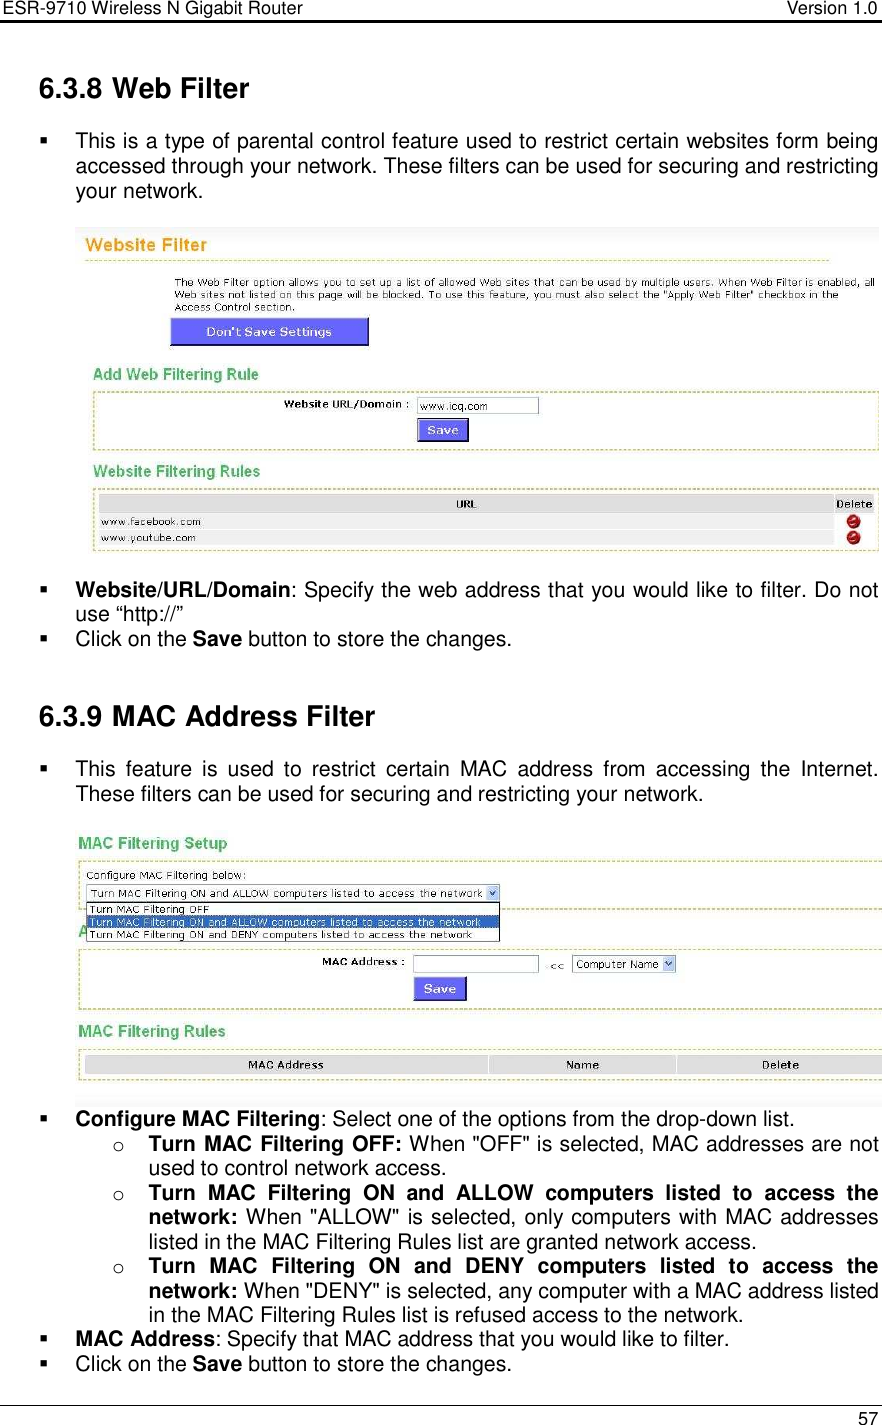 ESR-9710 Wireless N Gigabit Router                                    Version 1.0    57  6.3.8 Web Filter   This is a type of parental control feature used to restrict certain websites form being accessed through your network. These filters can be used for securing and restricting your network.     Website/URL/Domain: Specify the web address that you would like to filter. Do not use “http://”    Click on the Save button to store the changes.    6.3.9 MAC Address Filter   This  feature  is  used  to  restrict  certain  MAC  address  from  accessing  the  Internet. These filters can be used for securing and restricting your network.     Configure MAC Filtering: Select one of the options from the drop-down list.  o Turn MAC Filtering OFF: When &quot;OFF&quot; is selected, MAC addresses are not used to control network access.  o Turn  MAC  Filtering  ON  and  ALLOW  computers  listed  to  access  the network: When &quot;ALLOW&quot; is selected, only computers with MAC addresses listed in the MAC Filtering Rules list are granted network access.  o Turn  MAC  Filtering  ON  and  DENY  computers  listed  to  access  the network: When &quot;DENY&quot; is selected, any computer with a MAC address listed in the MAC Filtering Rules list is refused access to the network.   MAC Address: Specify that MAC address that you would like to filter.    Click on the Save button to store the changes.  